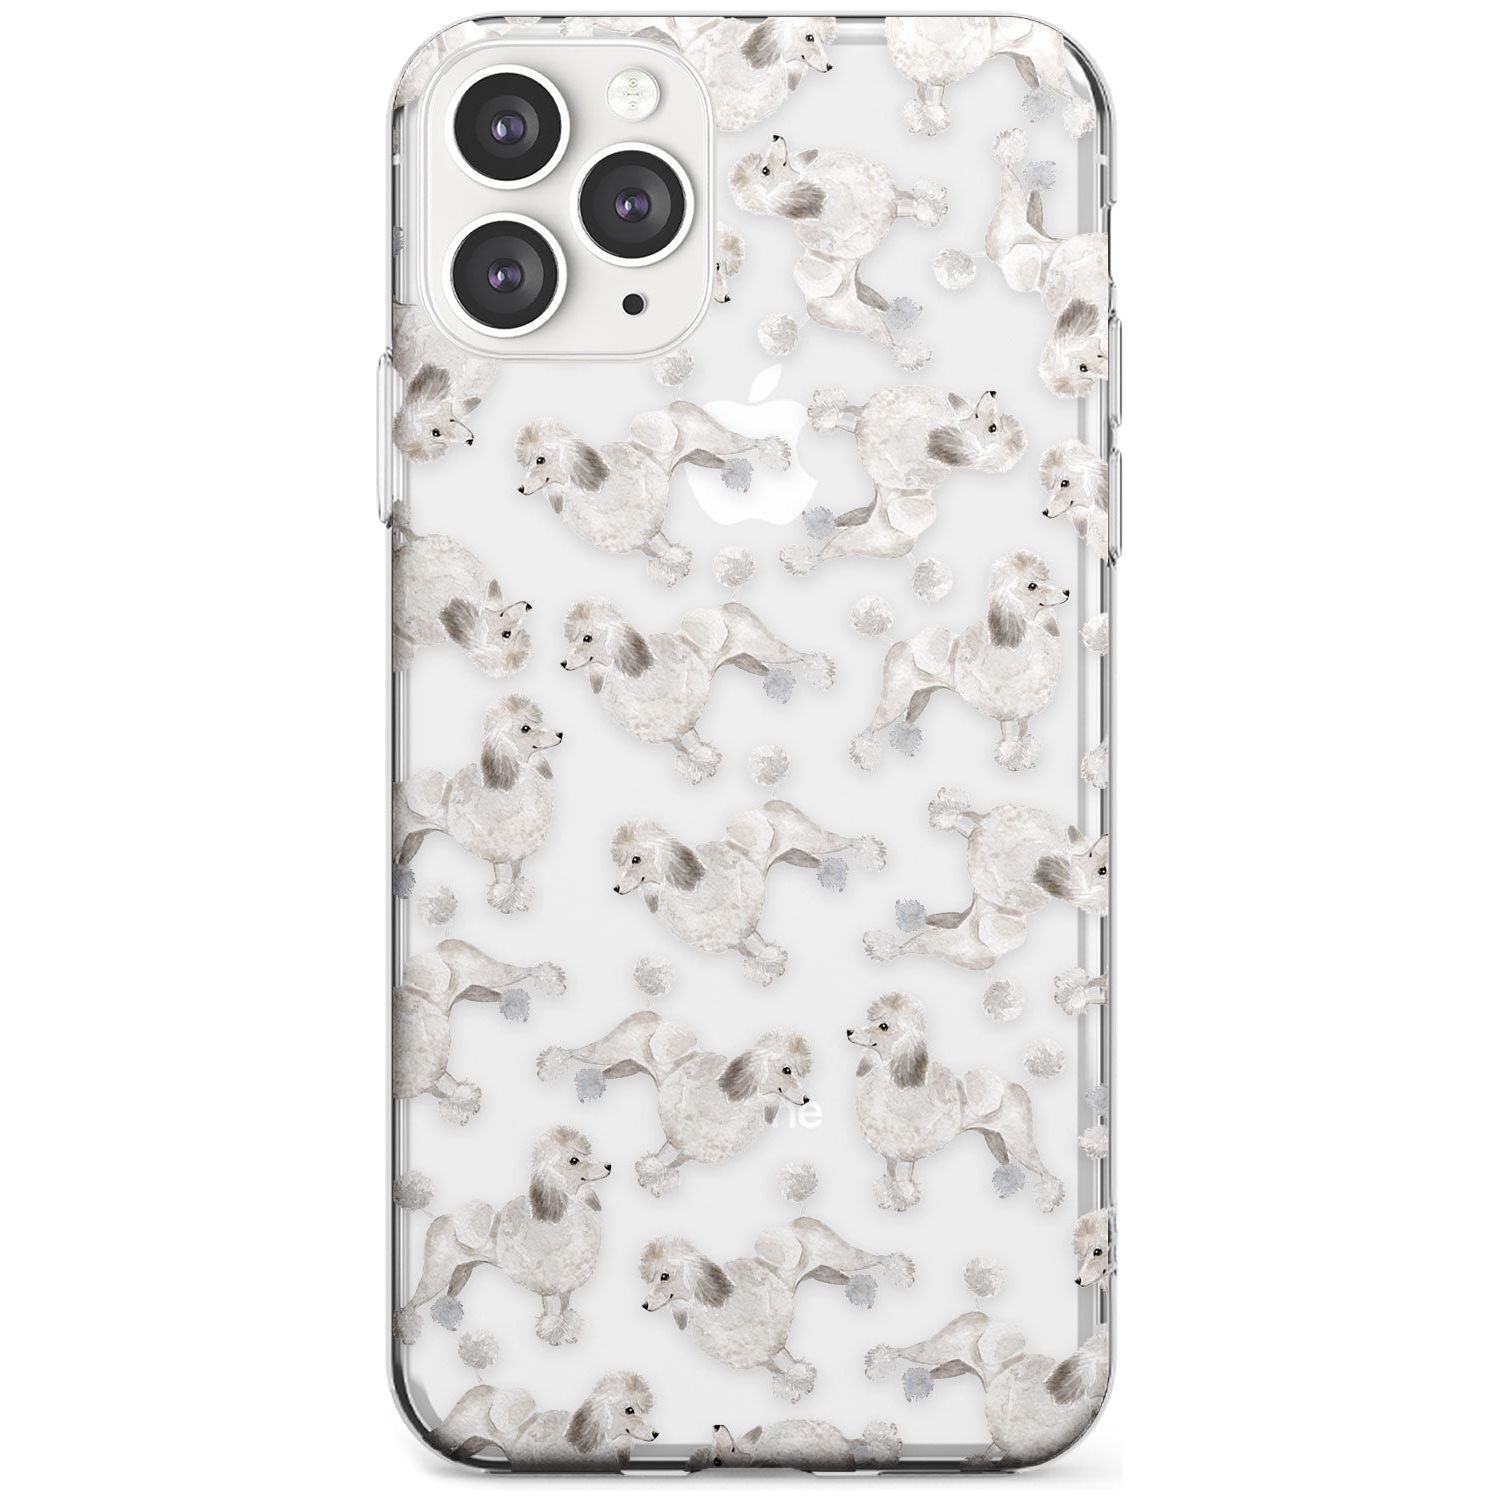 Poodle (White) Watercolour Dog Pattern Slim TPU Phone Case for iPhone 11 Pro Max